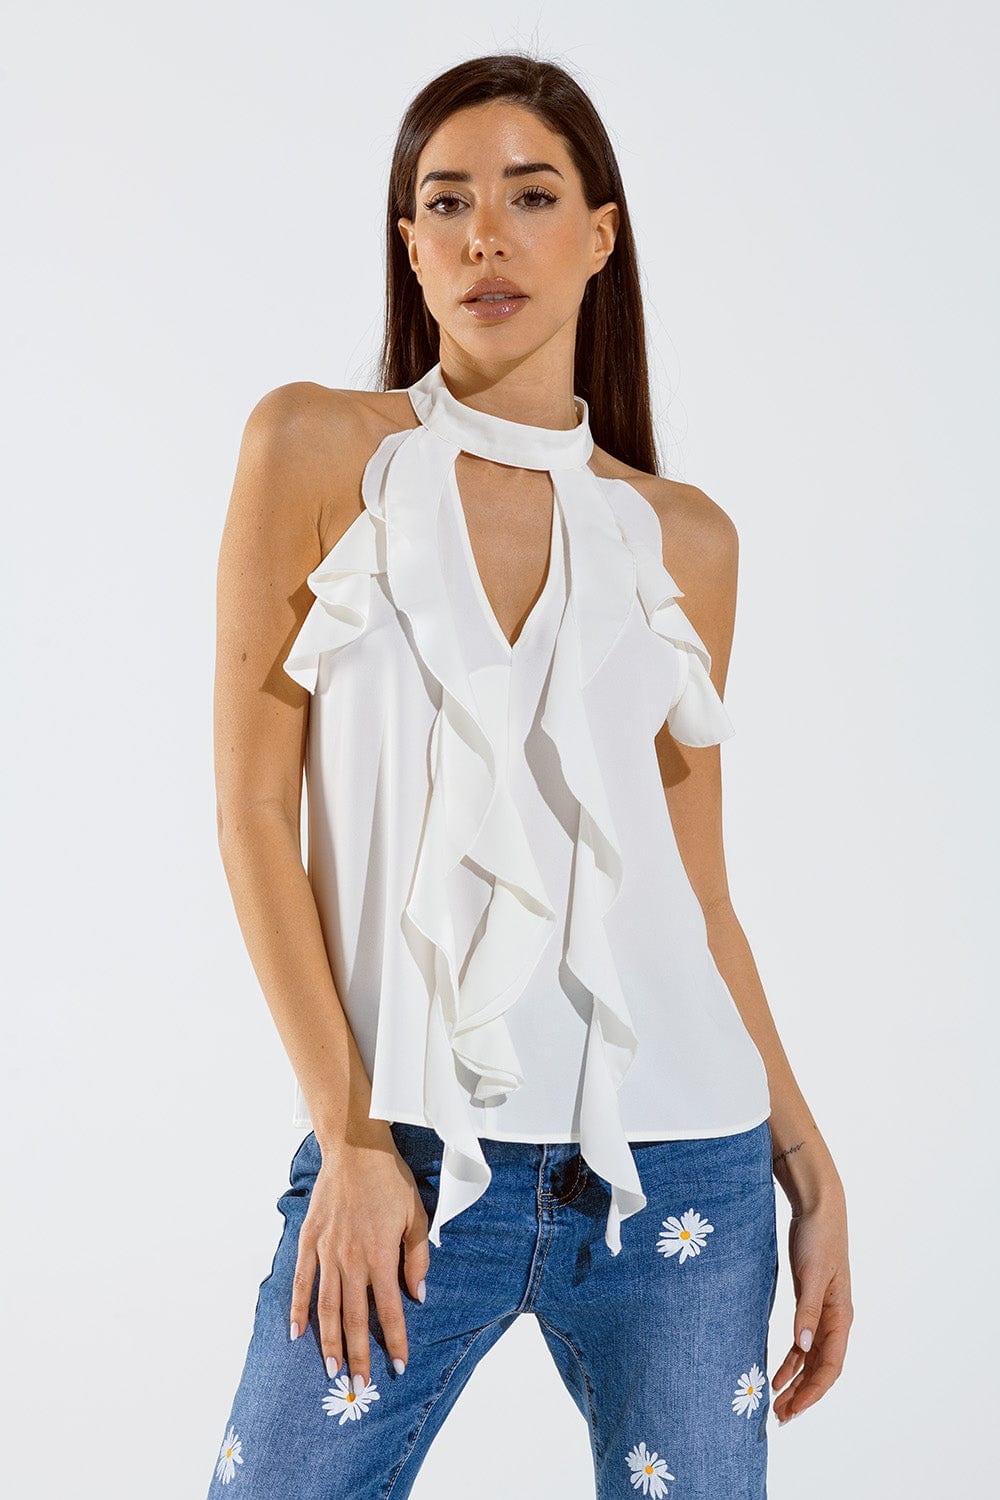 Q2 Women's Blouse Sleeveless White Top With Ruffled Details And High Neck